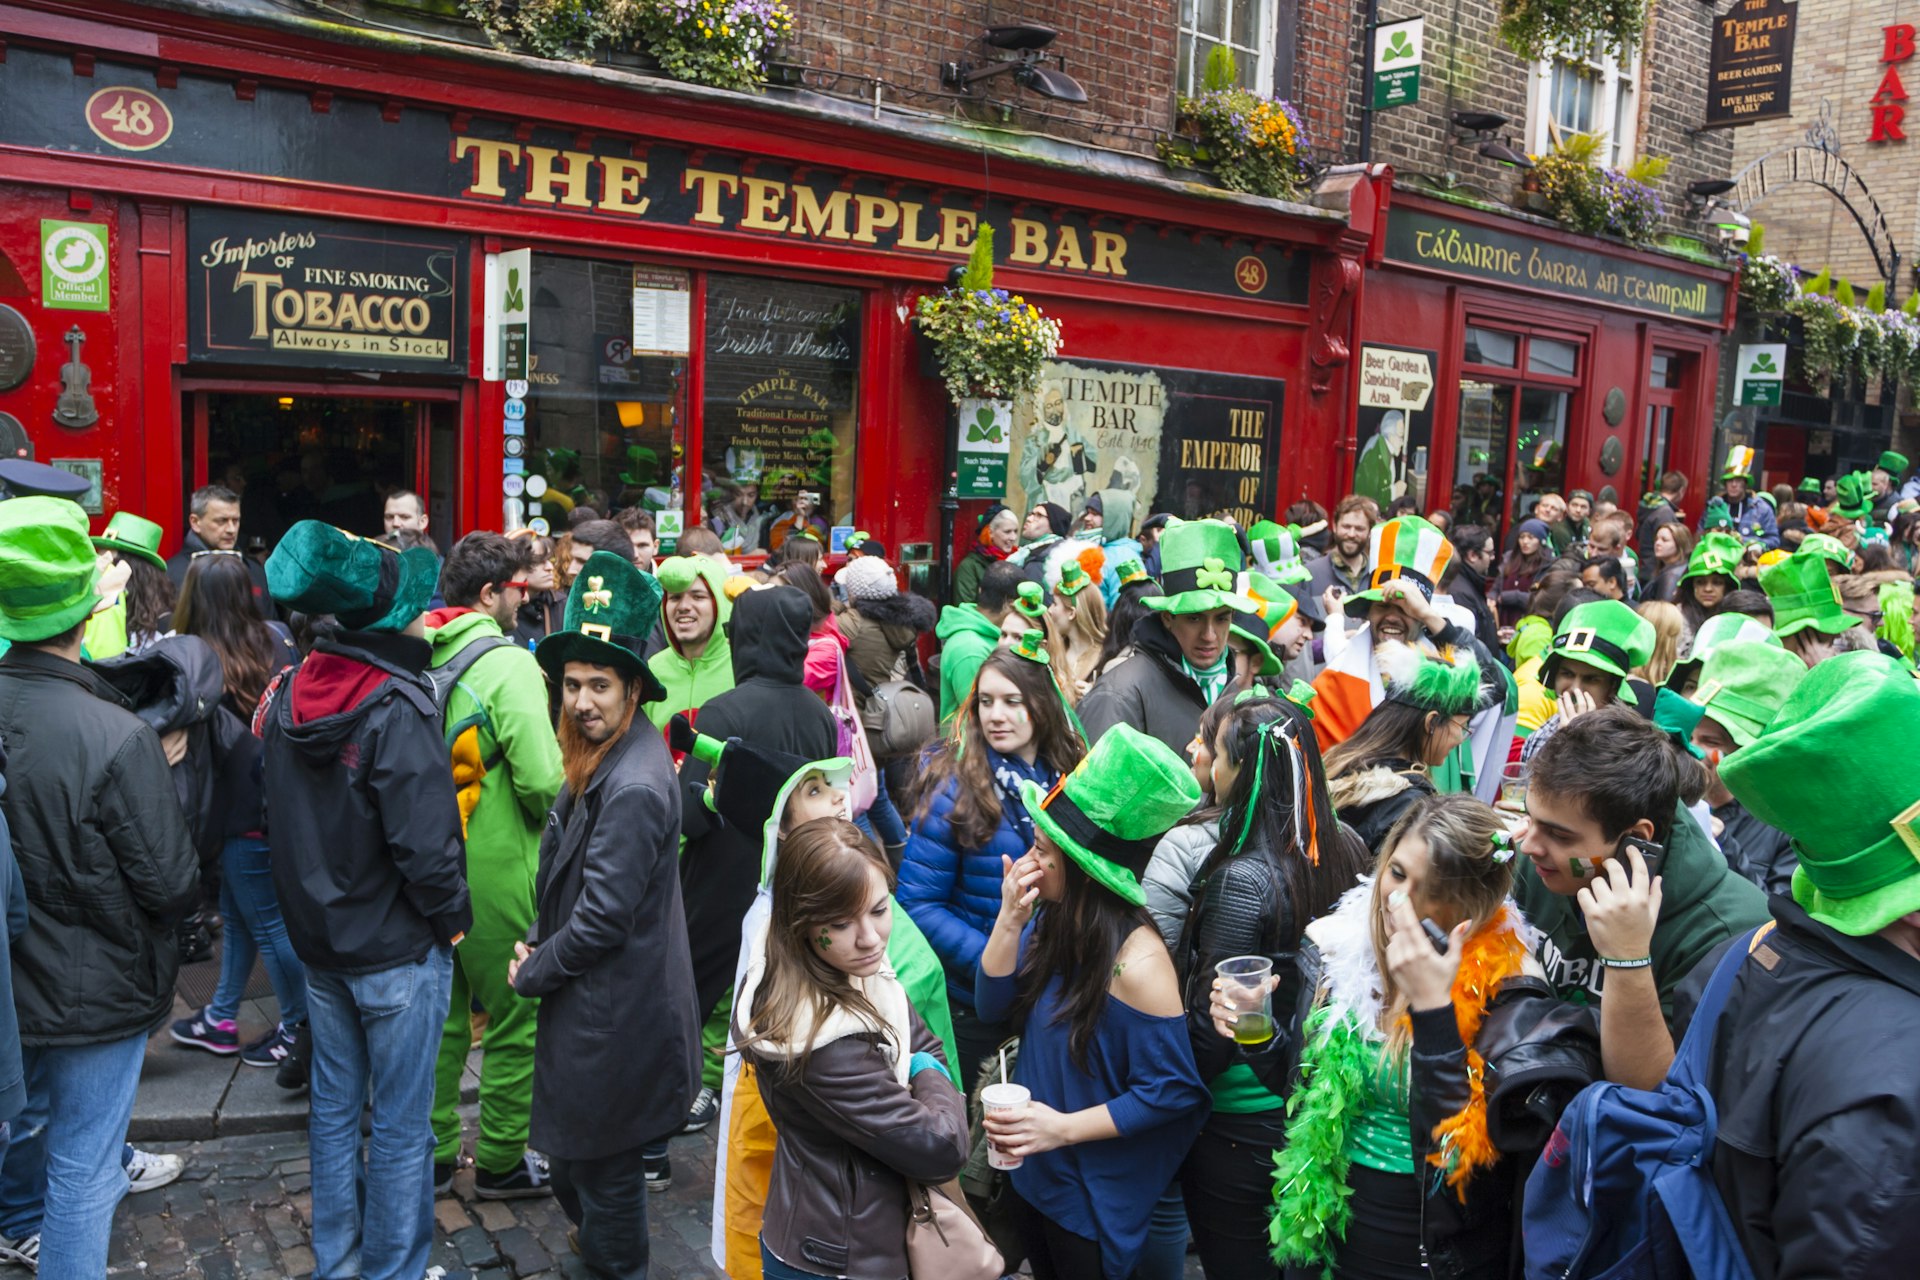 Crowds gather outside a pub named Temple Bar all dressed in oversized green hats to celebrate St Patrick's Day